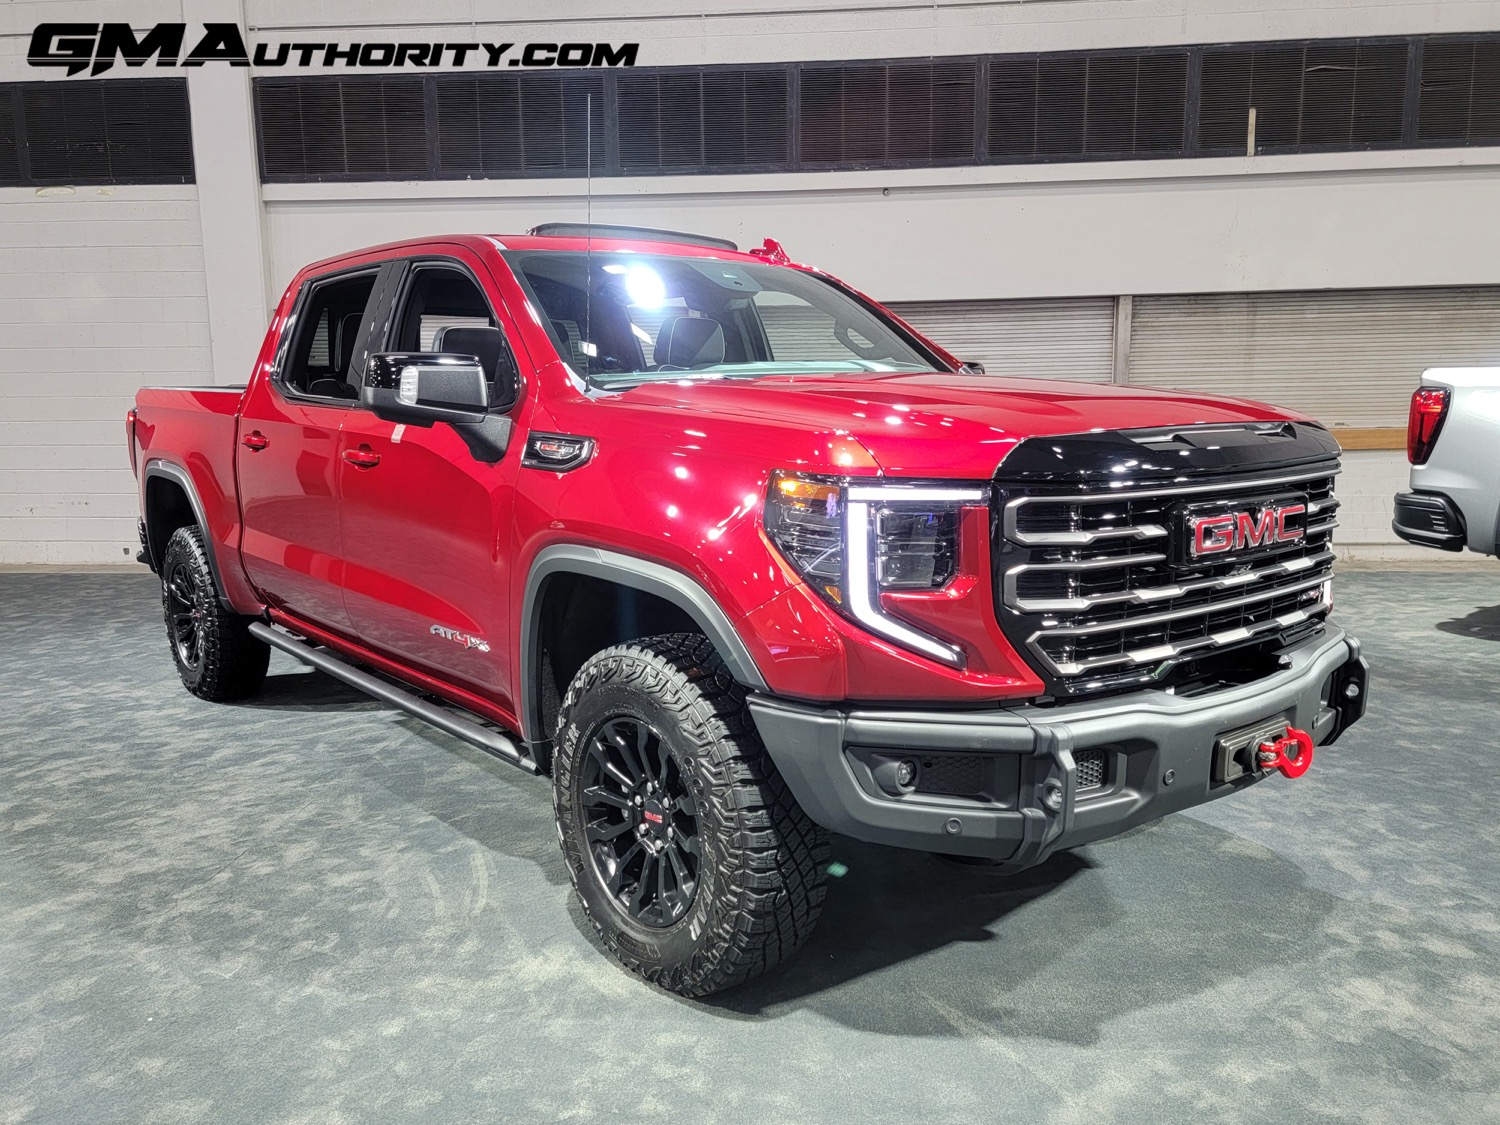 2023 GMC Sierra AT4X With AEV Equipment: Live Photo Gallery